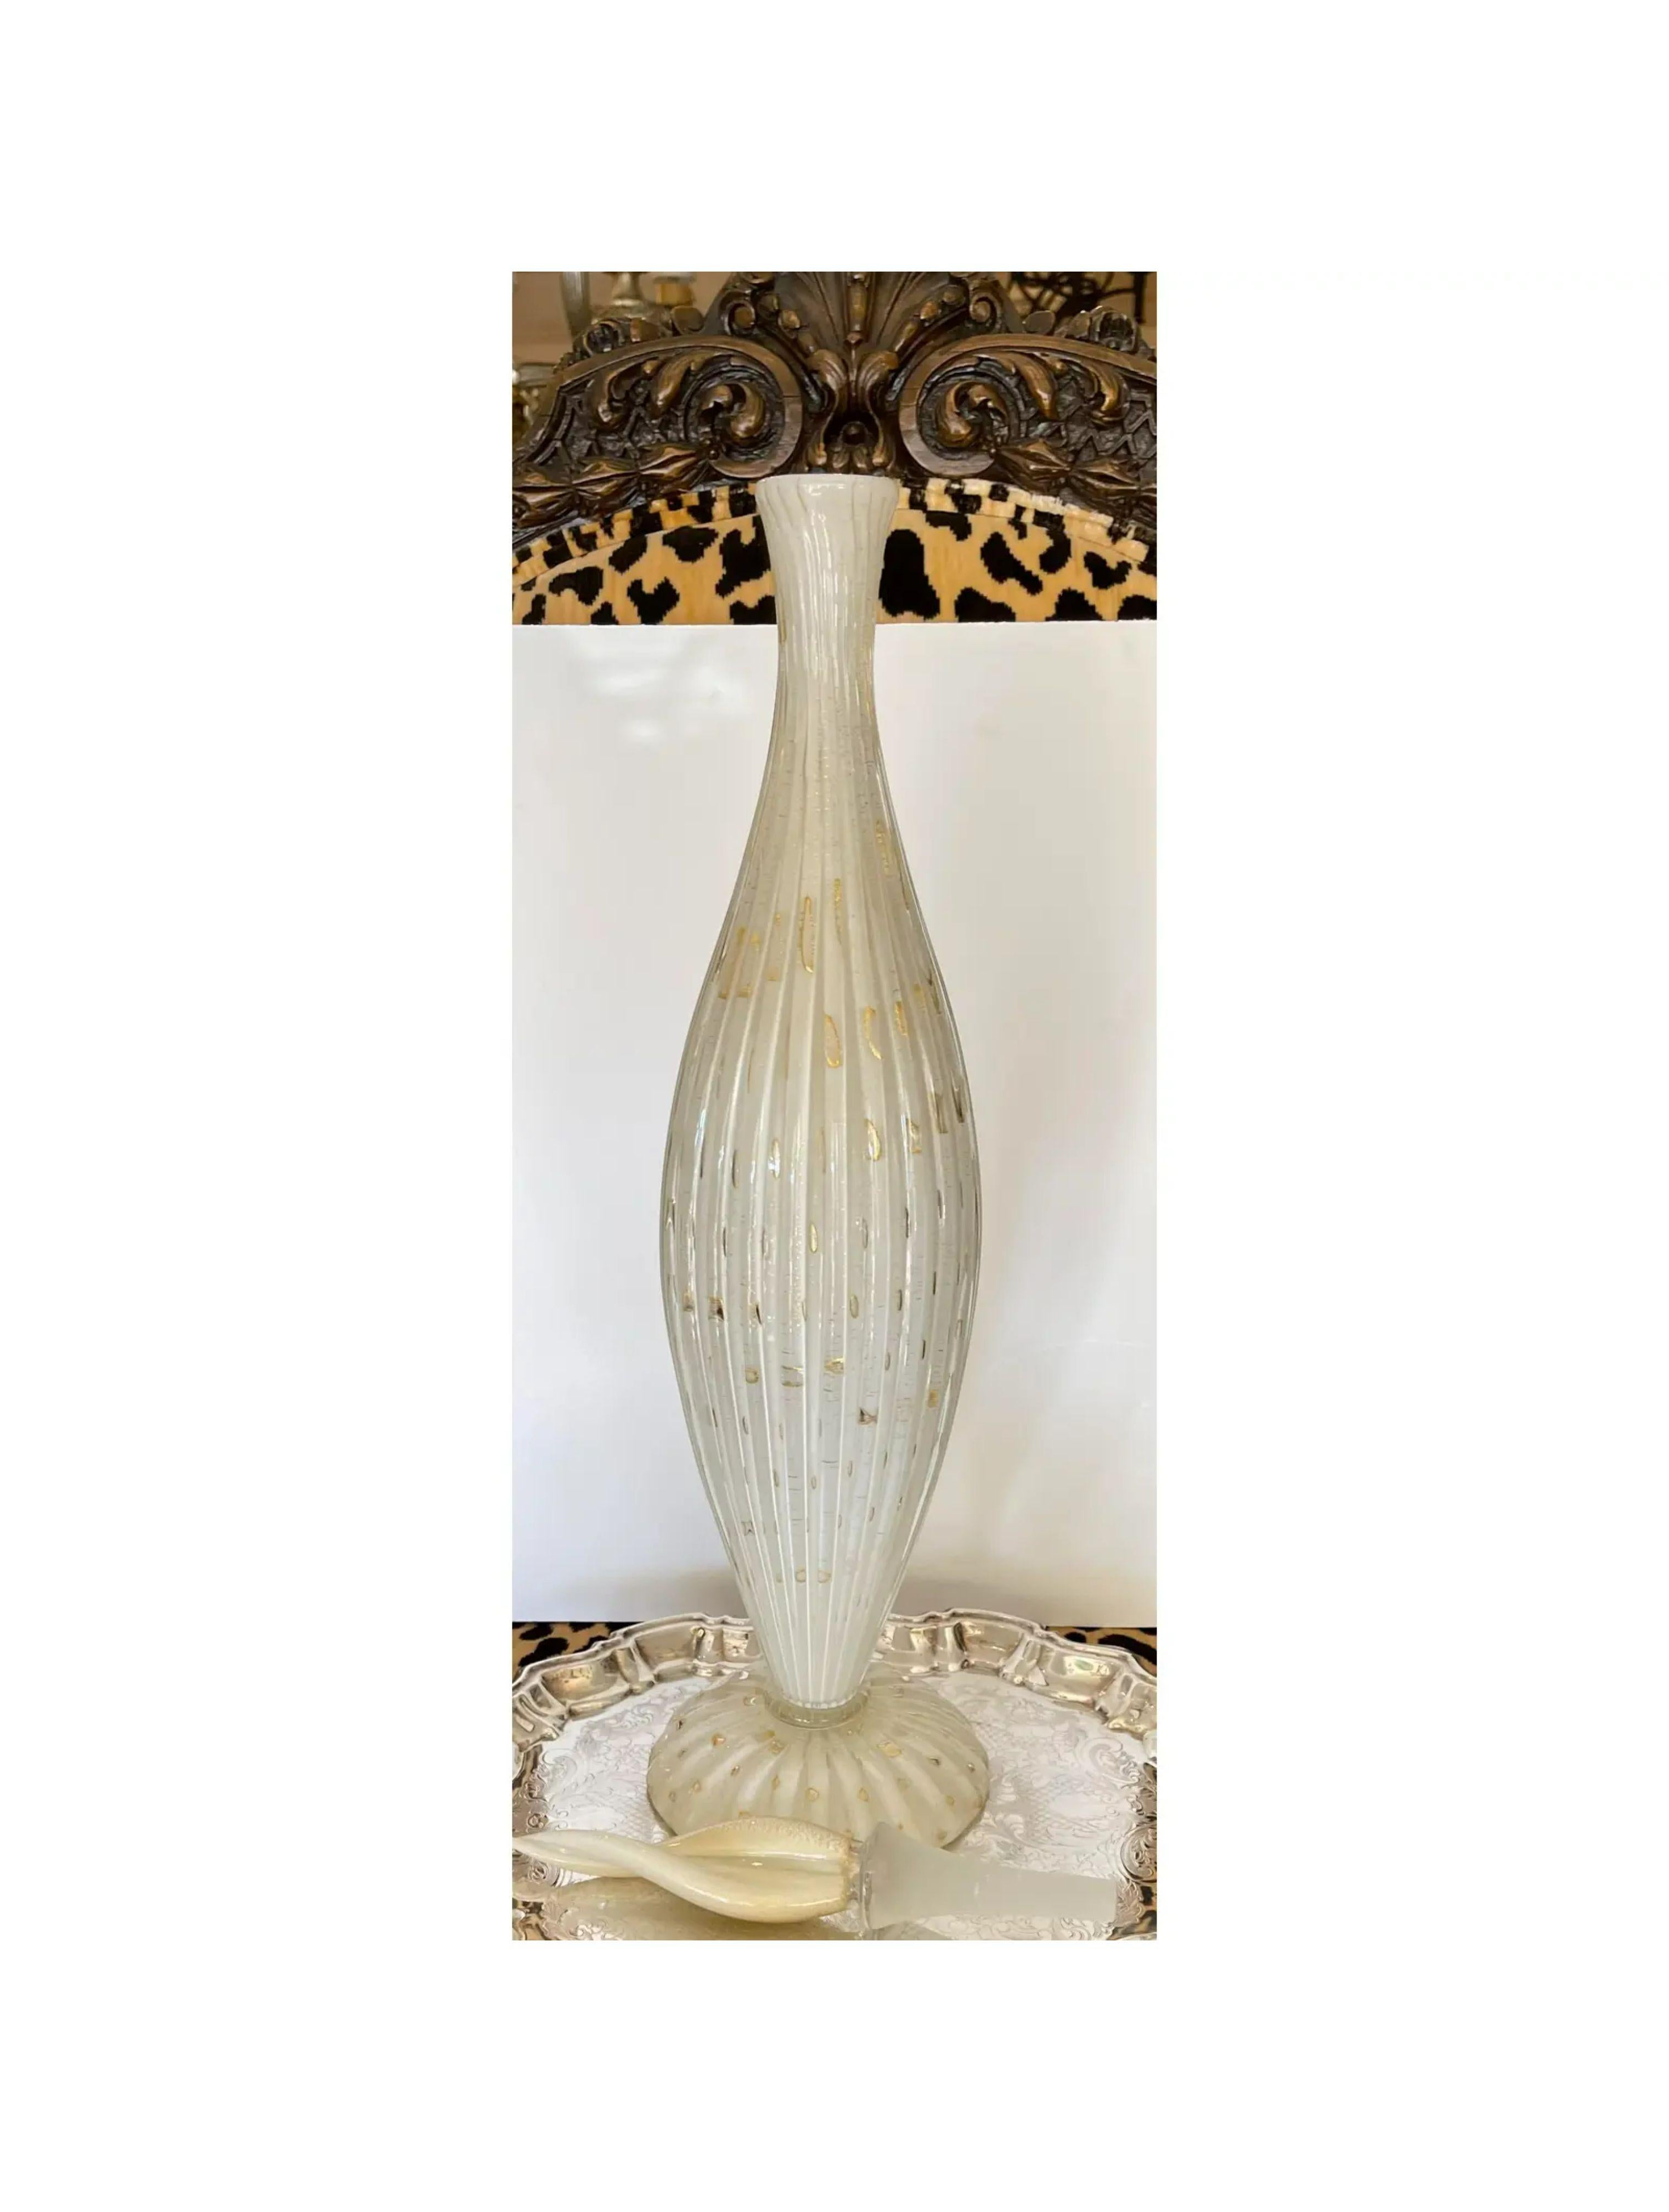 Huge Mid-Century Modern Alfredo Barbini Murano Bottle Decanter, 1950s In Good Condition For Sale In LOS ANGELES, CA